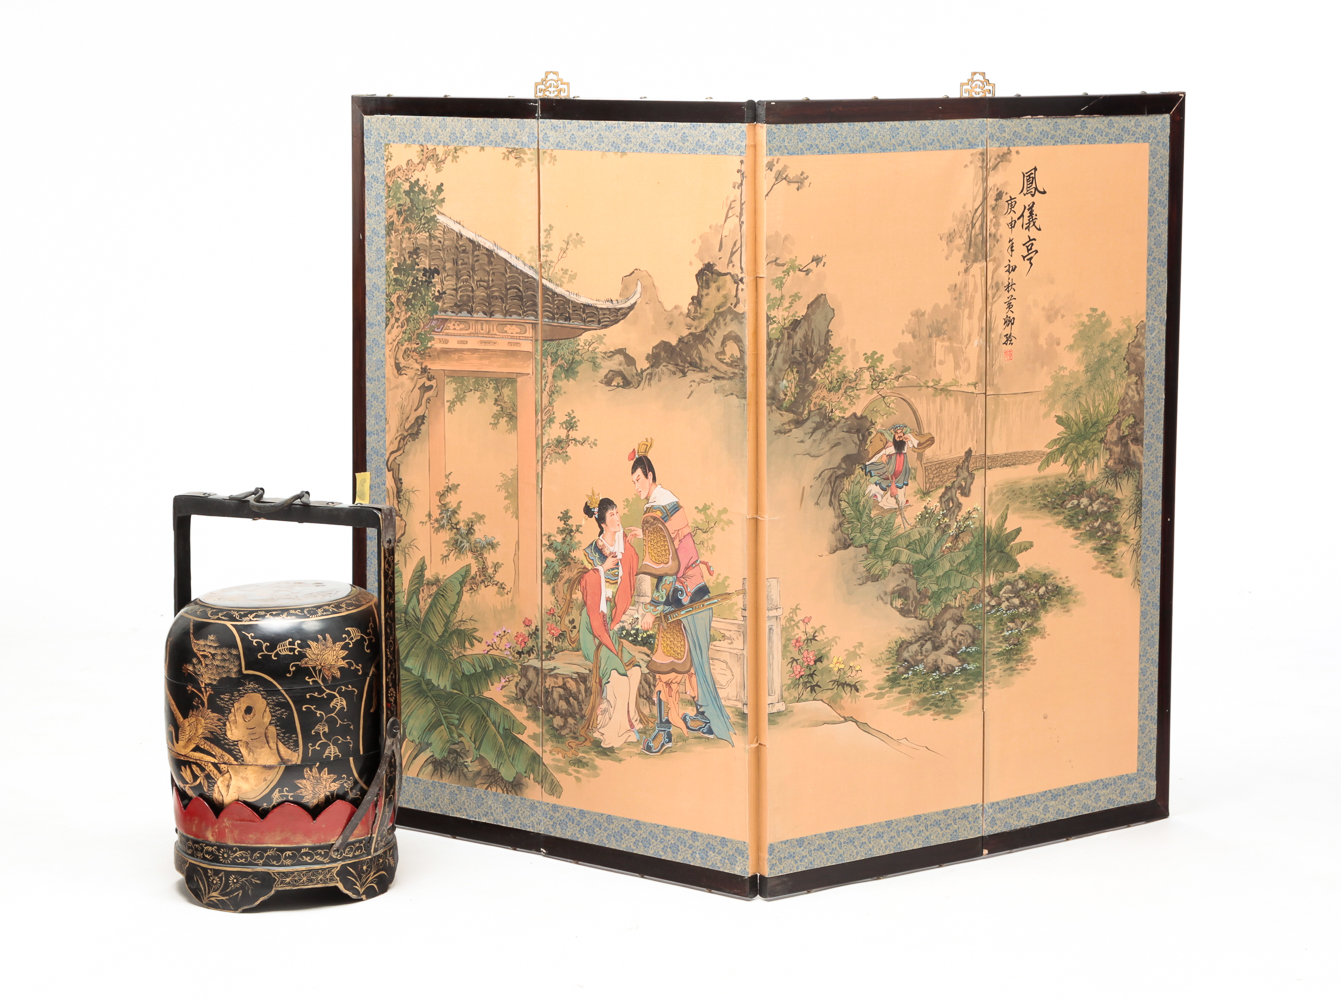 CHINESE SCREEN AND WEDDING CONTAINER  2e022e